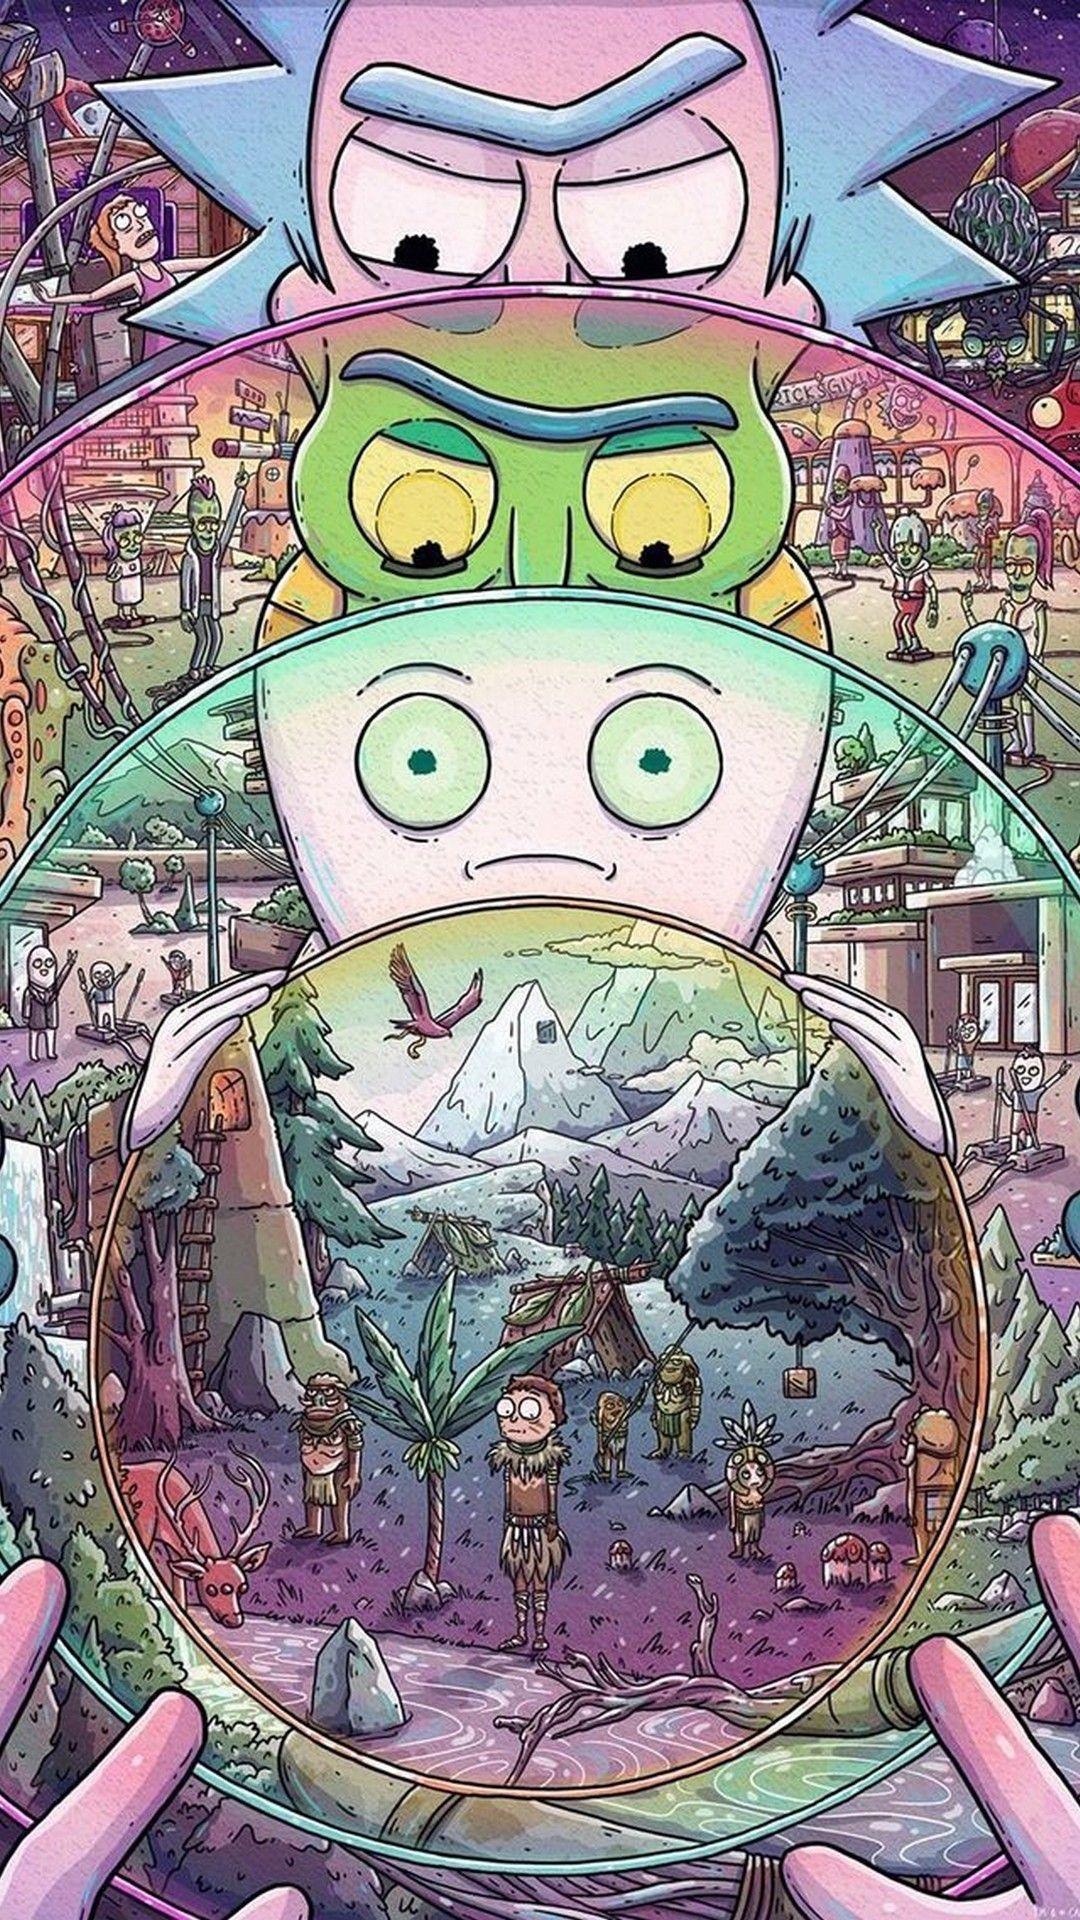 Best Rick and Morty Wallpaper Free Best Rick and Morty